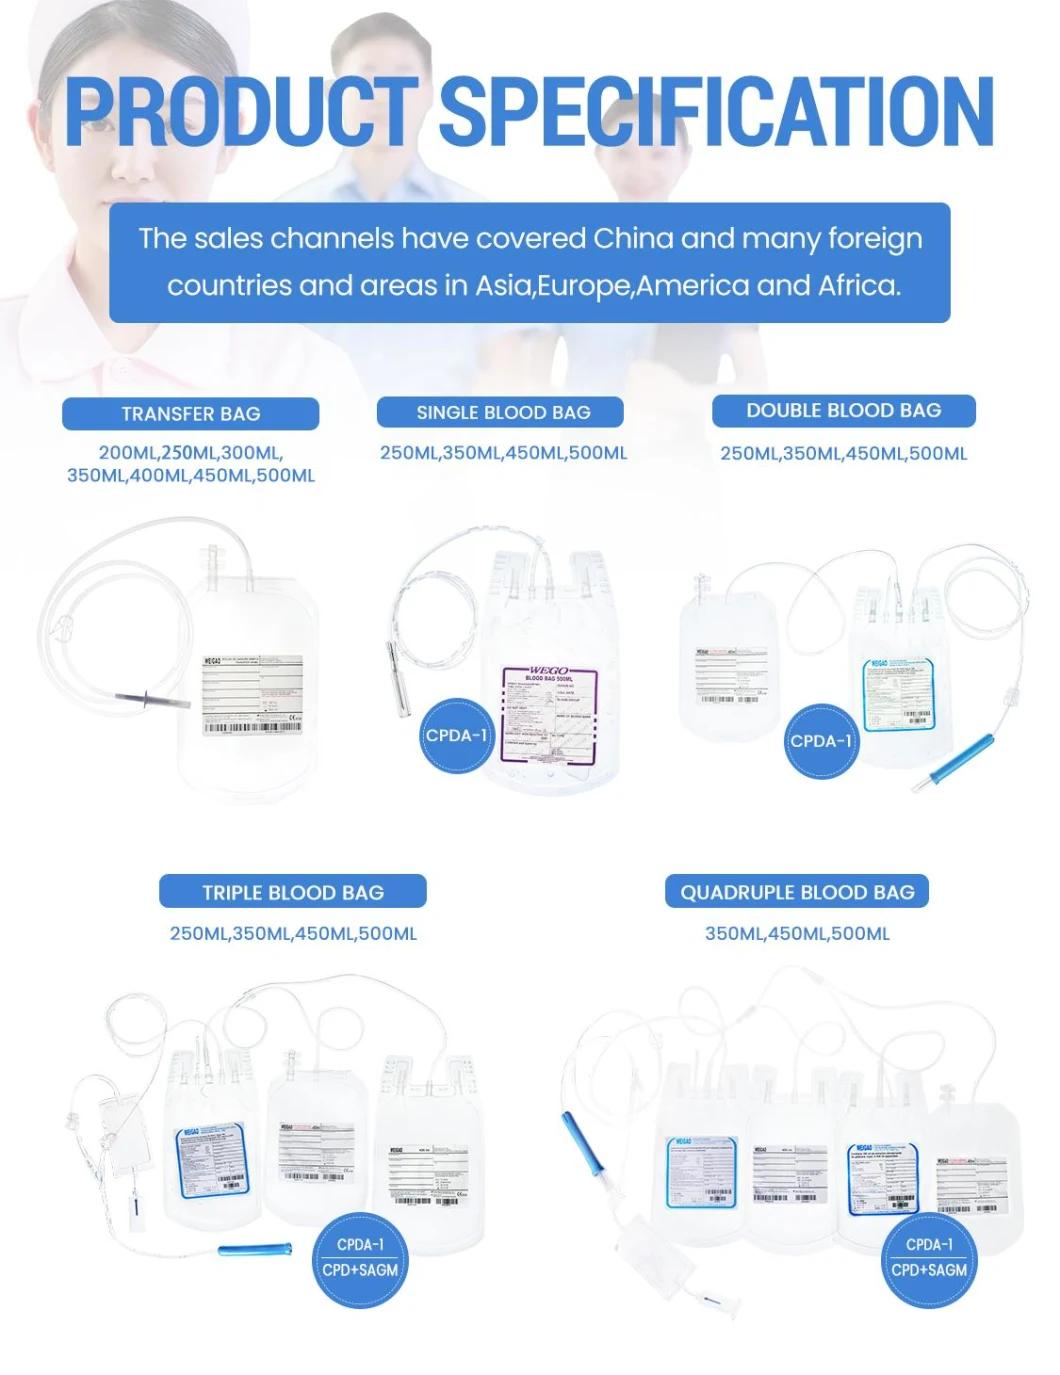 Wego Medical Disposable Blood Bag for Blood Tranfusion